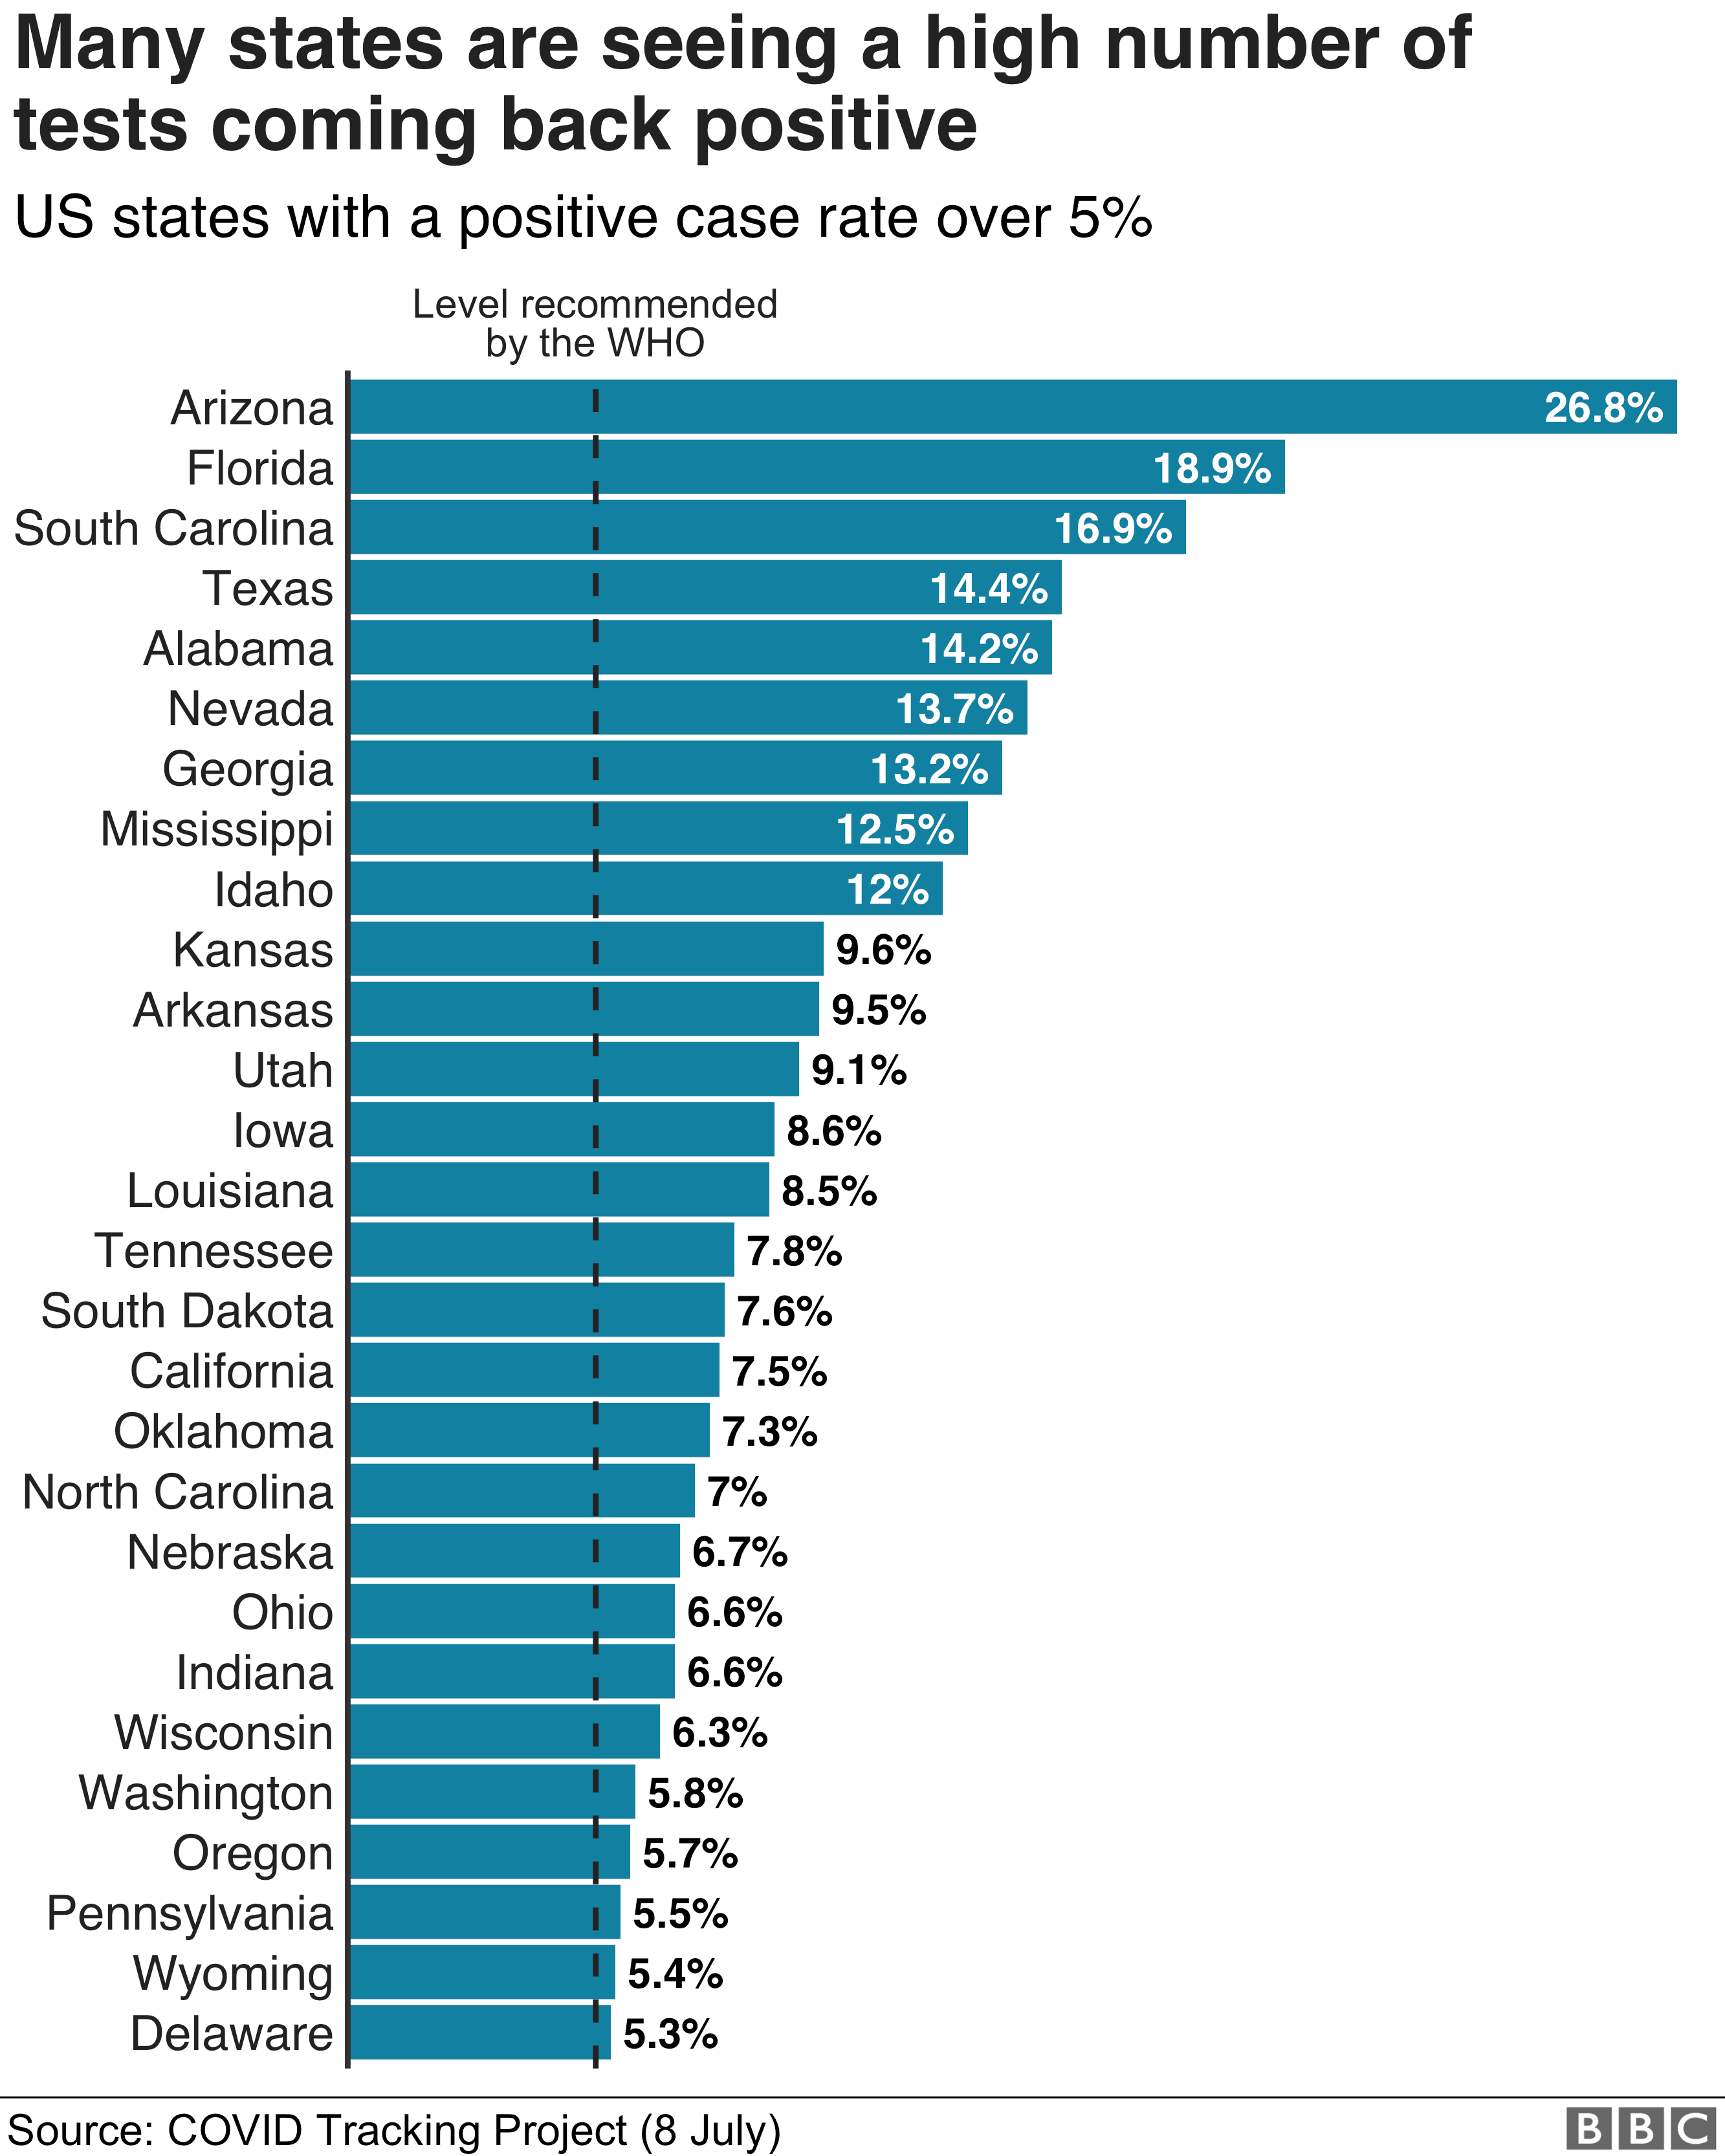 Chart showing the US states that have a positive case rate over 5%